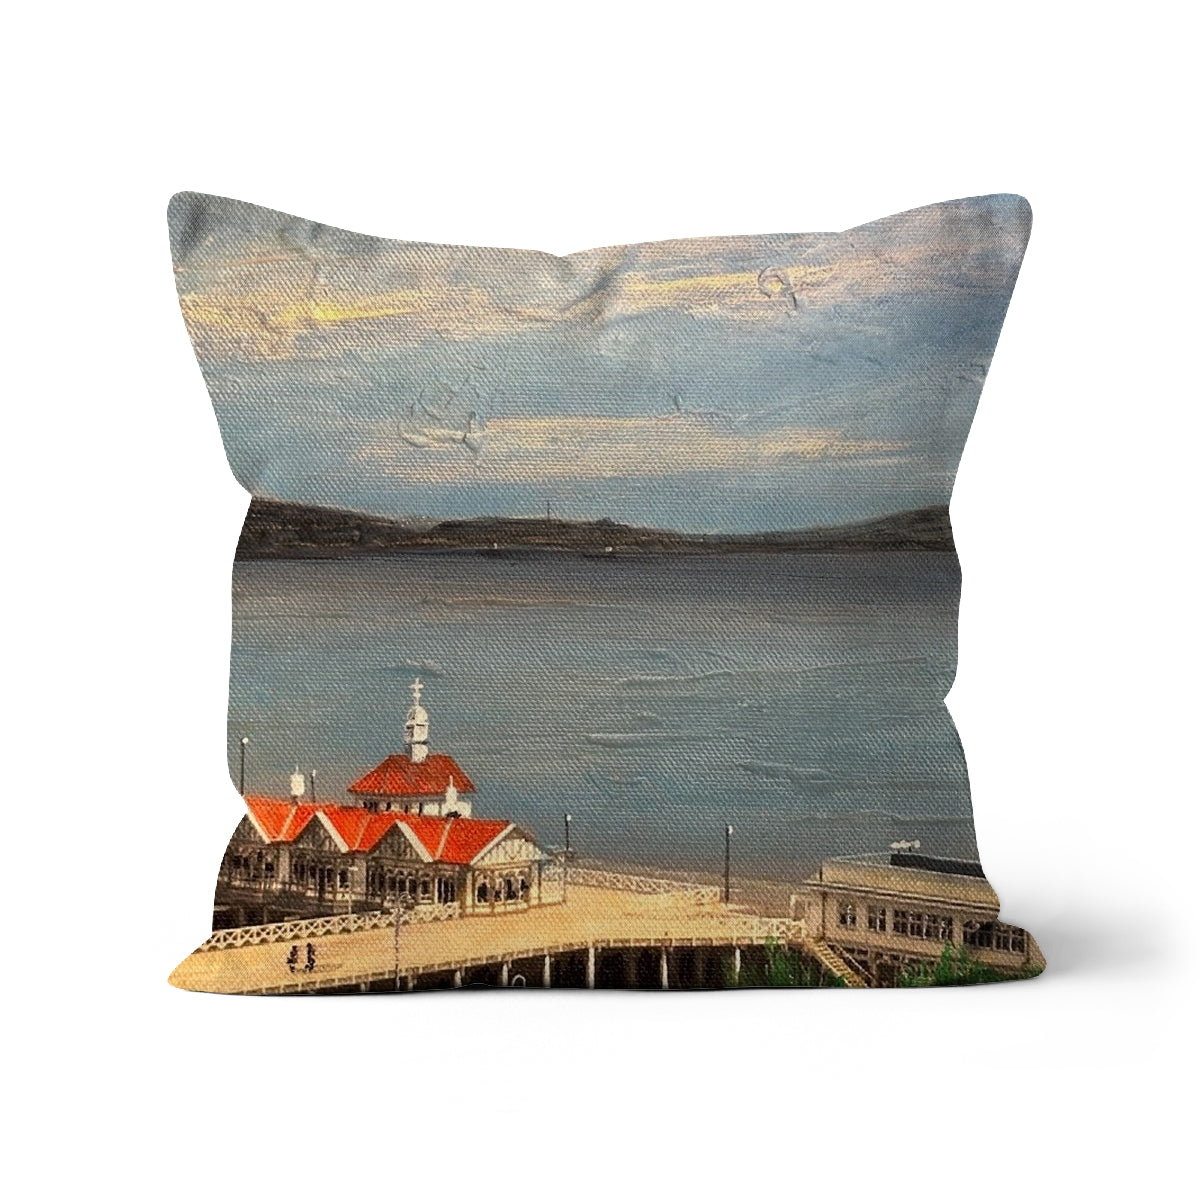 Looking From Dunoon Art Gifts Cushion-Cushions-River Clyde Art Gallery-Faux Suede-12"x12"-Paintings, Prints, Homeware, Art Gifts From Scotland By Scottish Artist Kevin Hunter